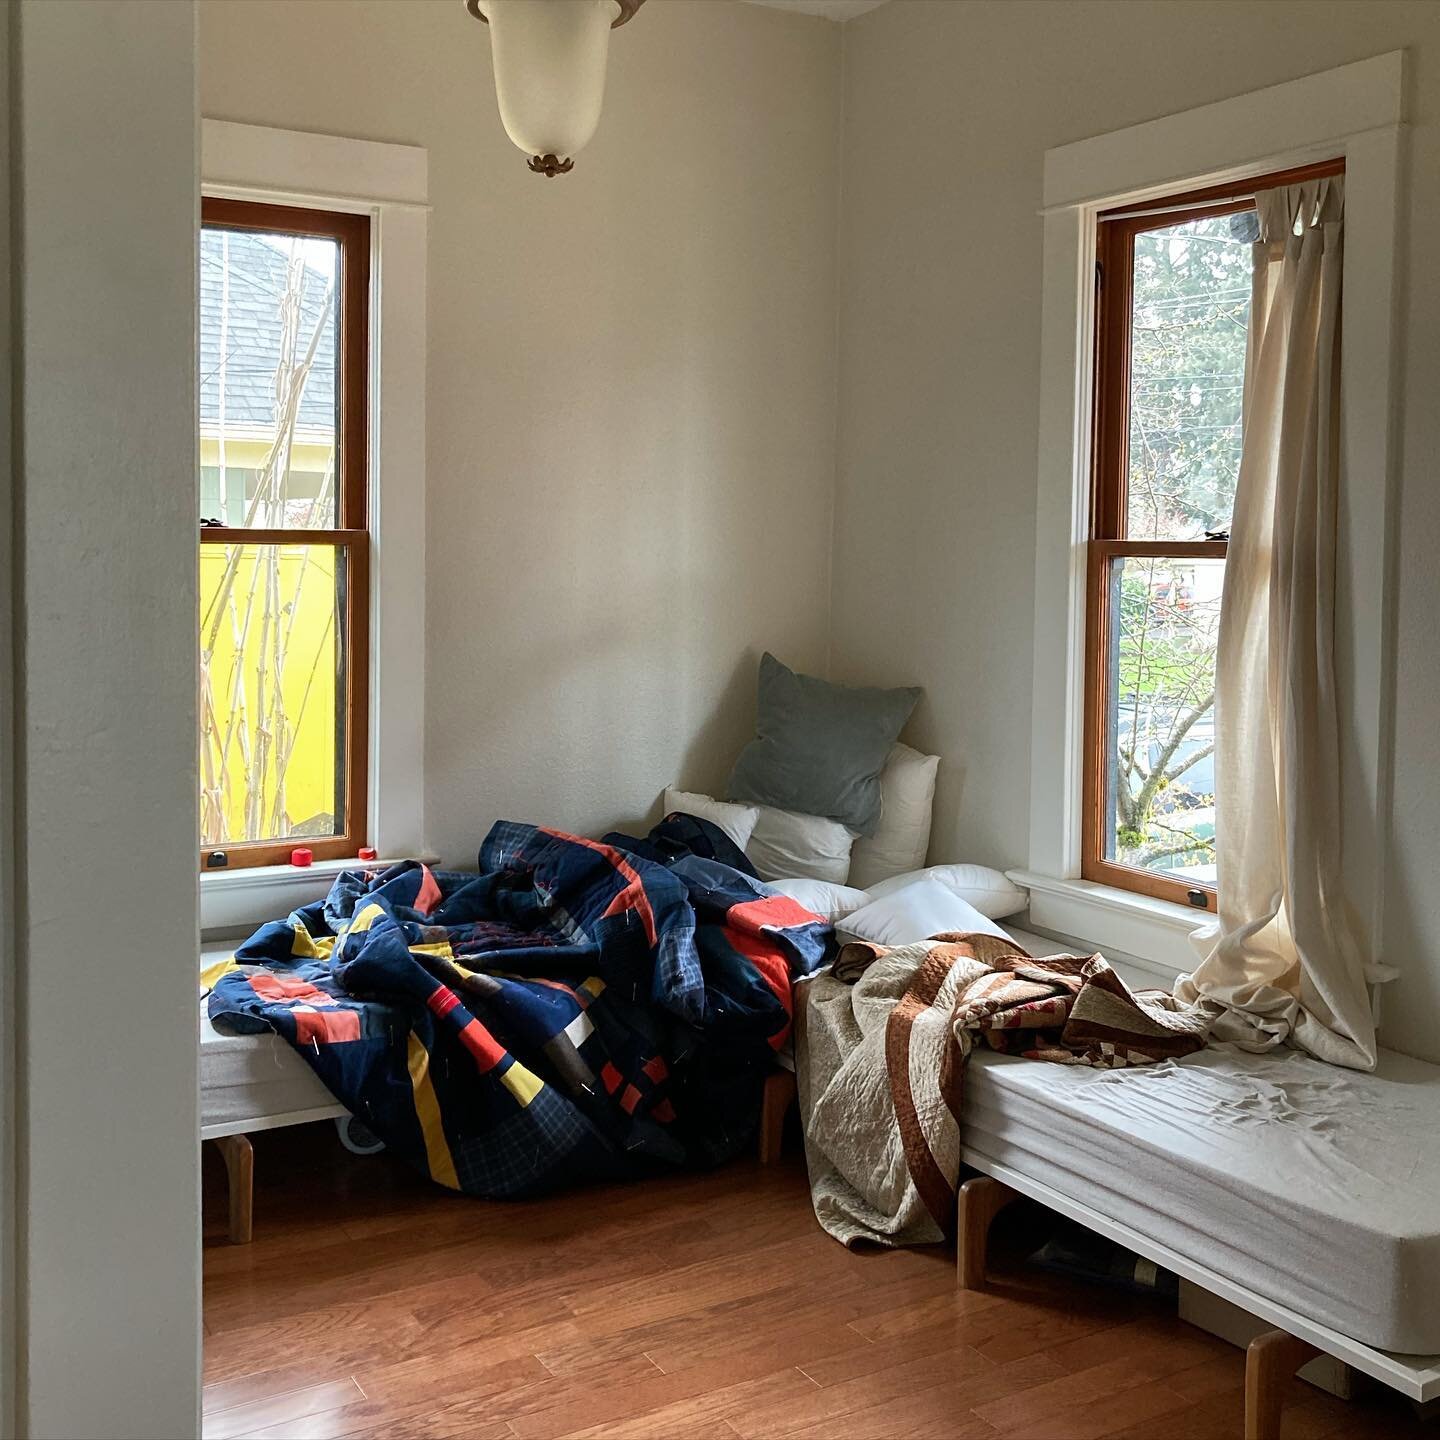 One of the most unfinished rooms of the house featuring my patented decor style, a-quilt-in-progress on any available surface. Not to be outdone by our neighbor&rsquo;s yellow box truck, and the world&rsquo;s ugliest light fixture &mdash; still someh